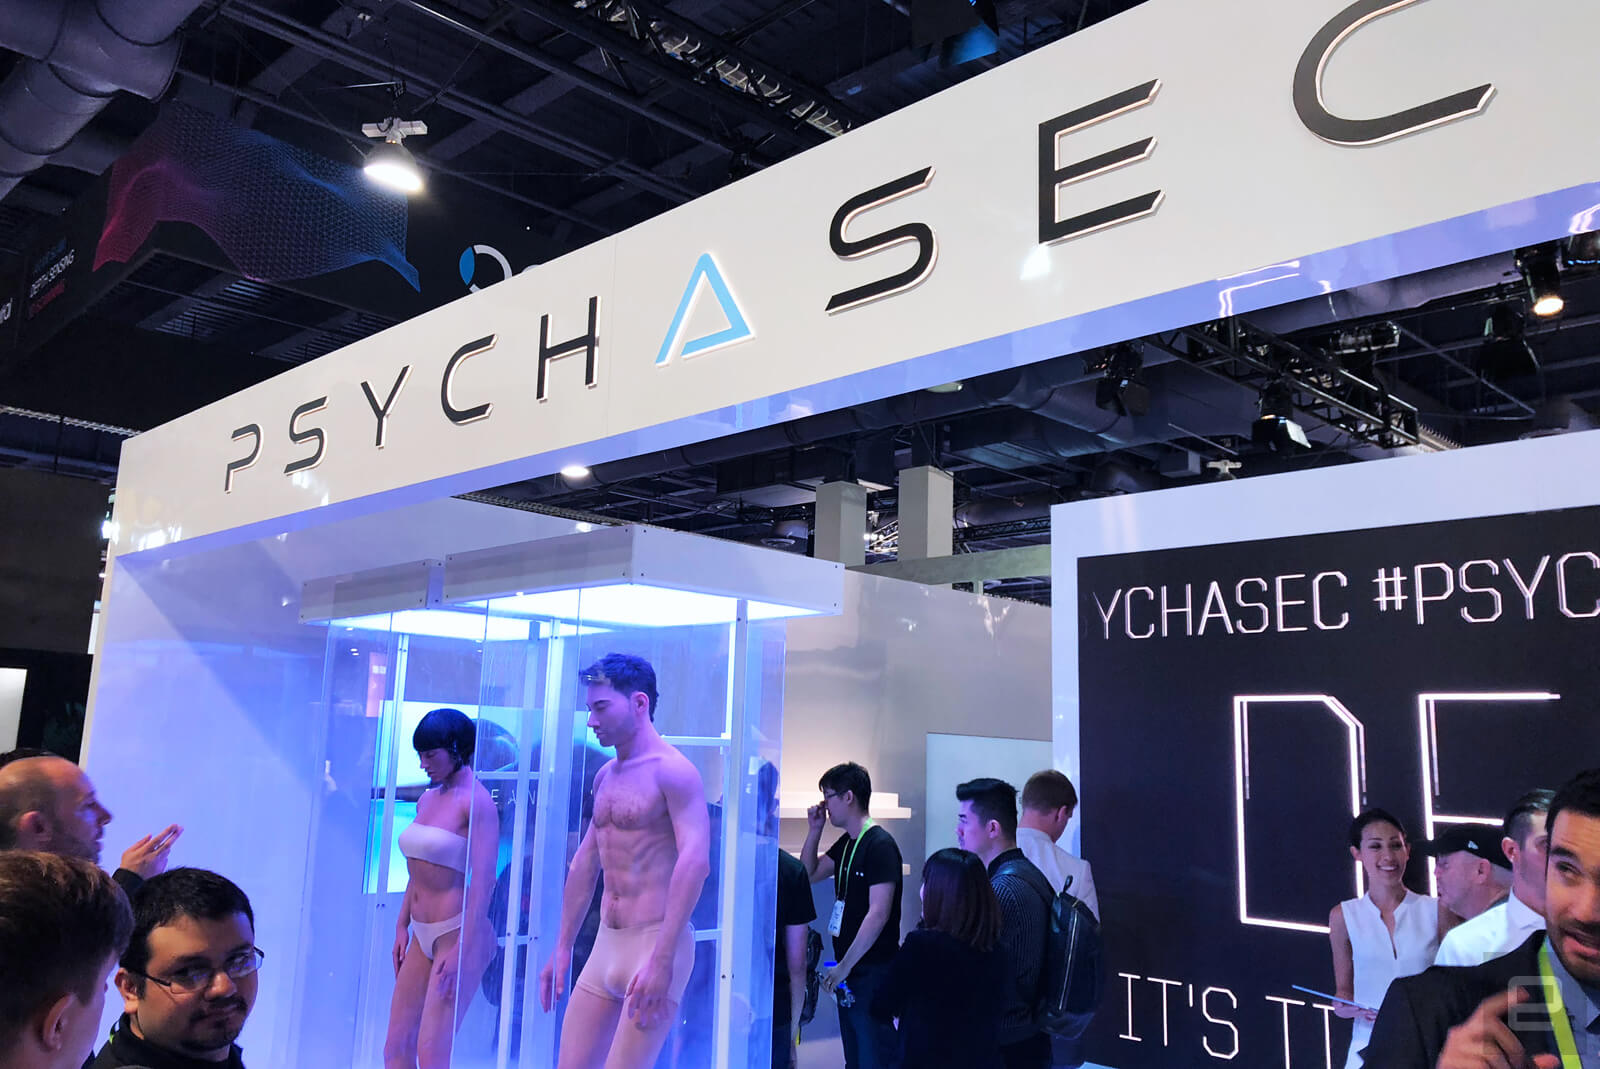 Netflix had a fake biotech booth at CES to promote a new series